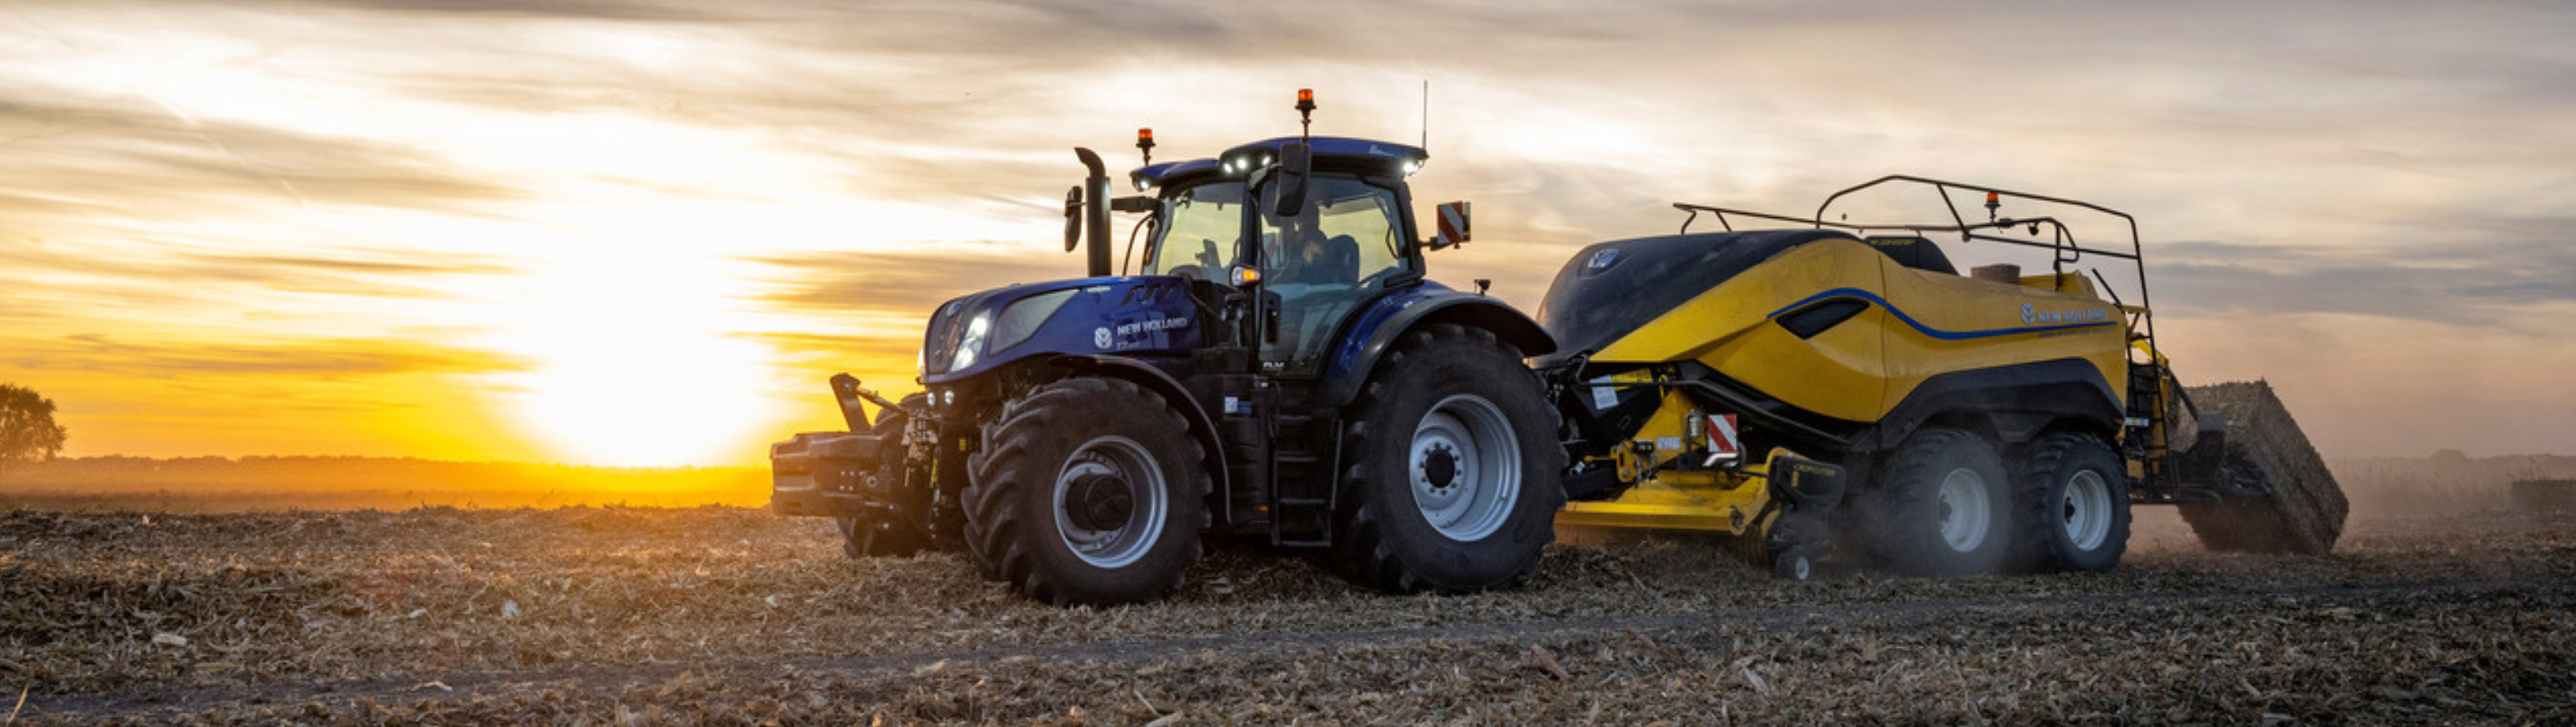 T7 LWB Tractor  New Holland UK